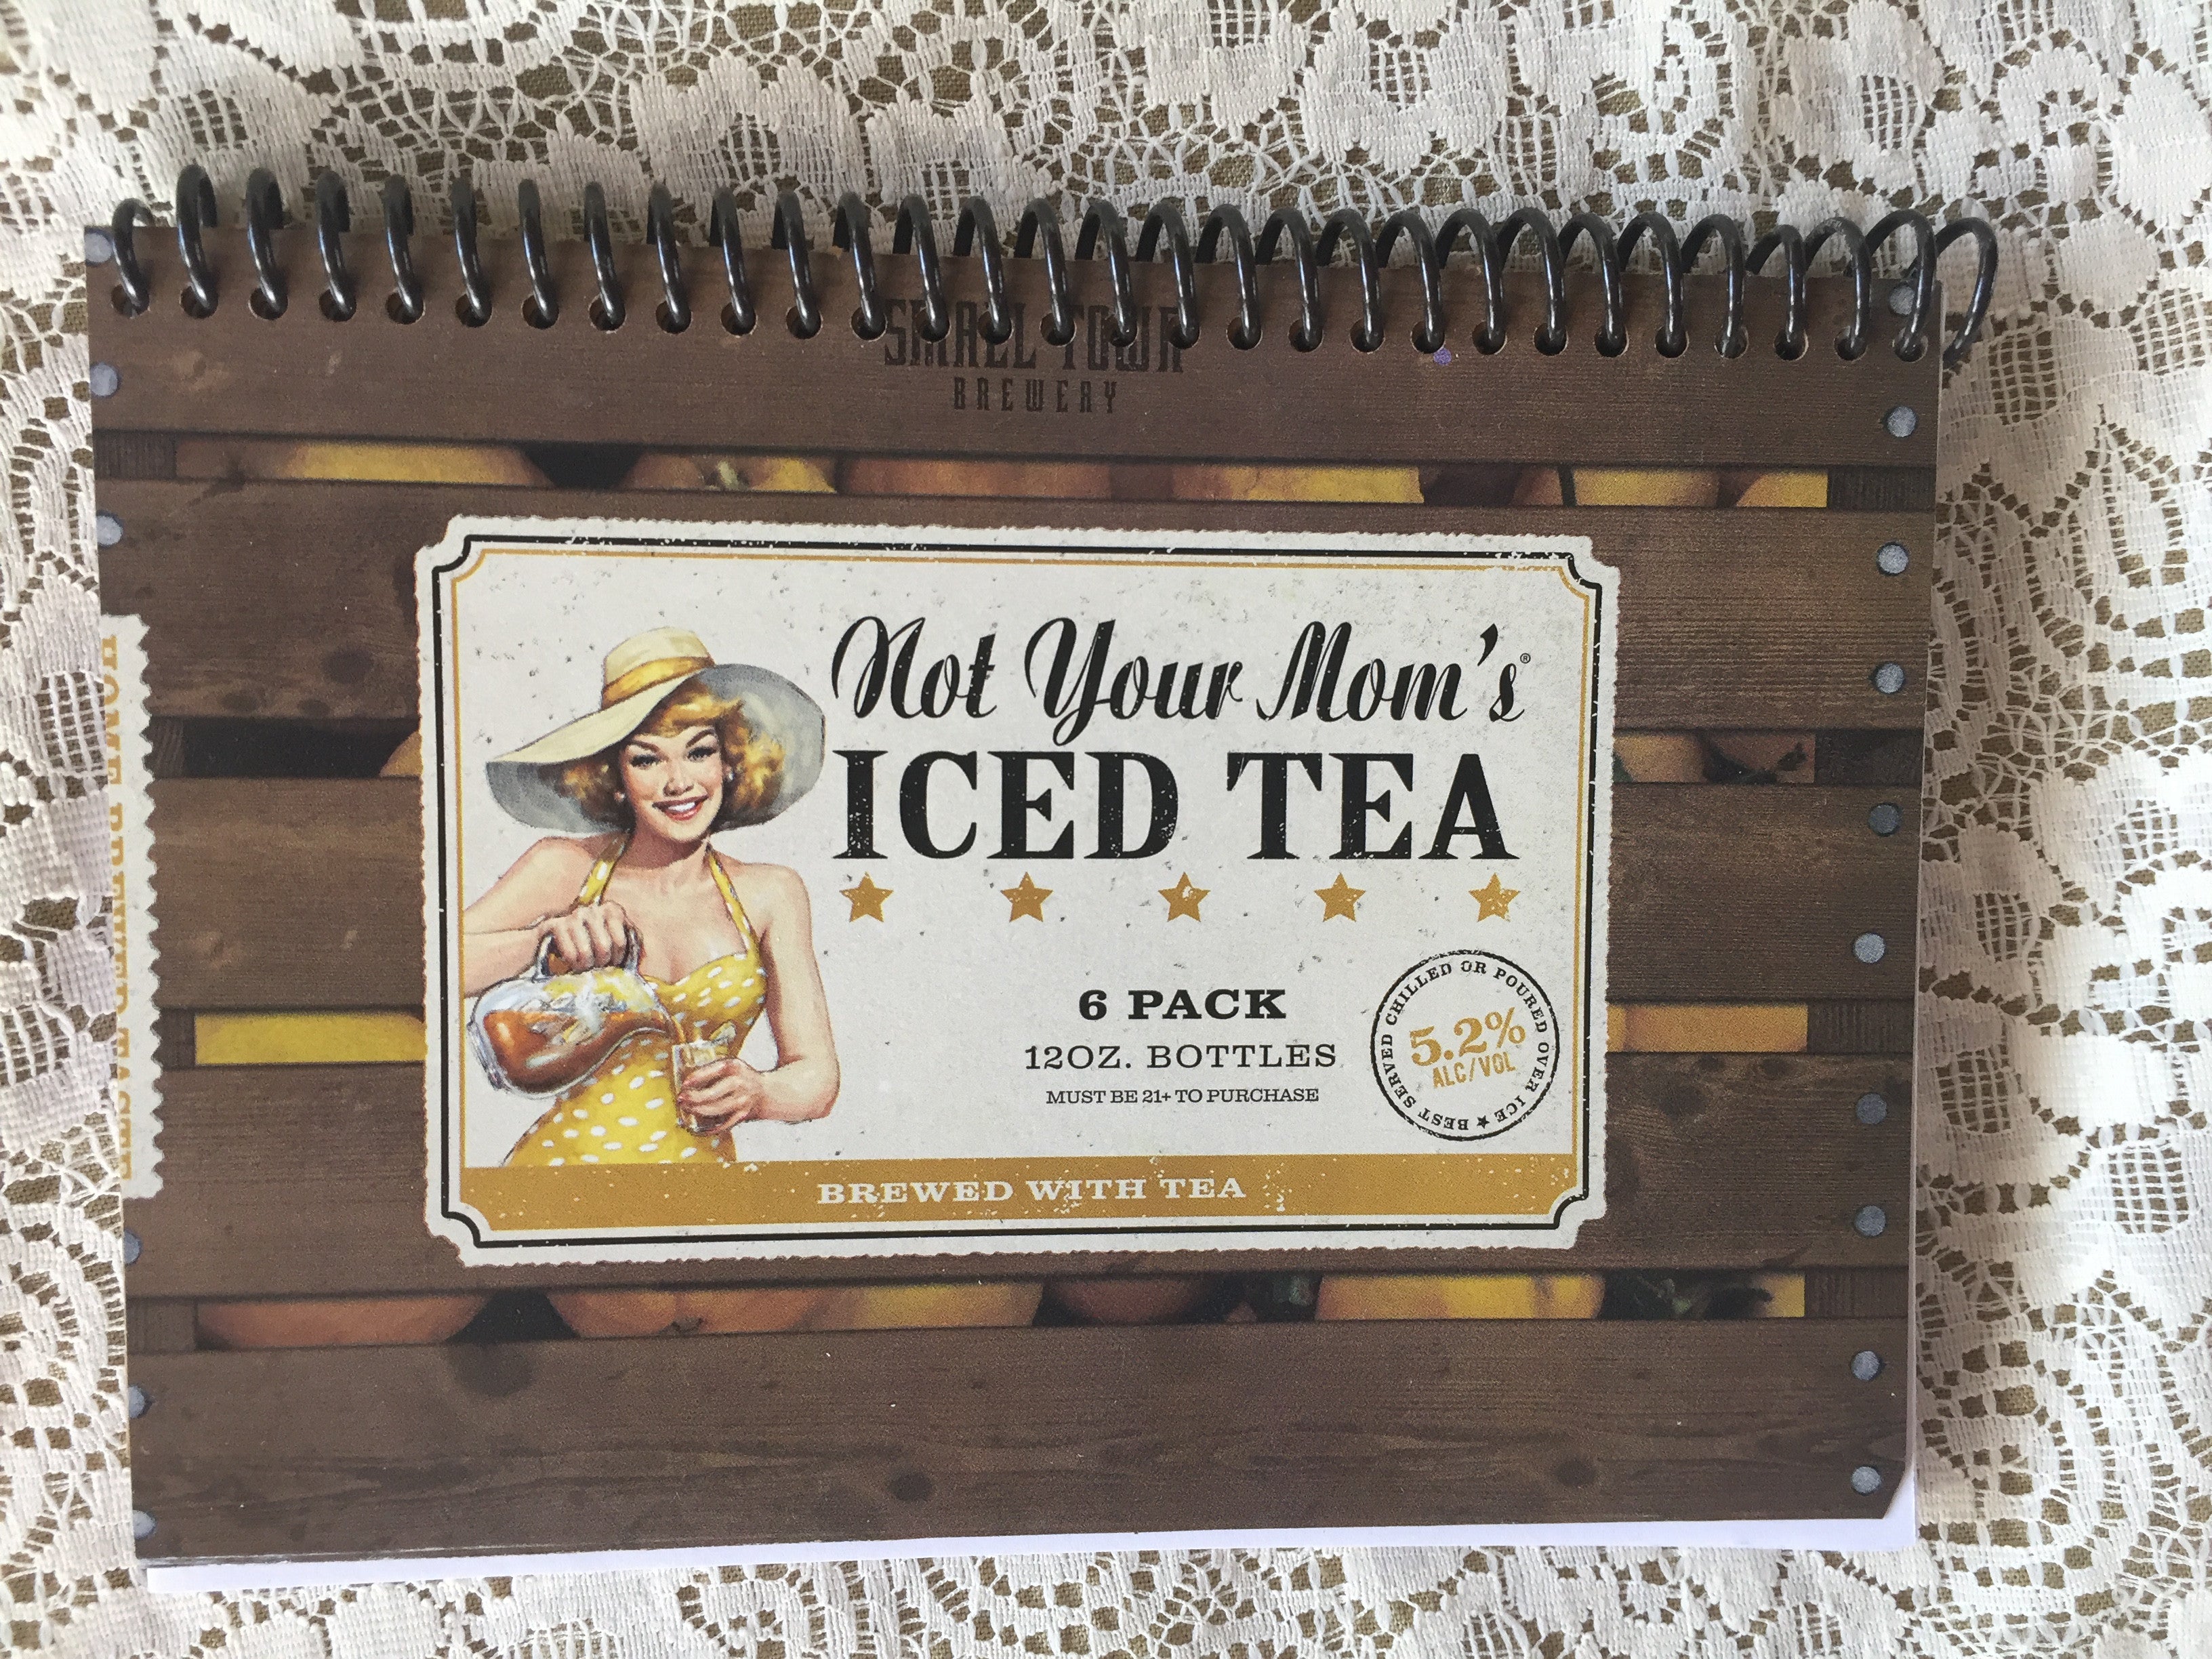 Not Your Mom's Iced Tea Recycled Beer Carton Notebook